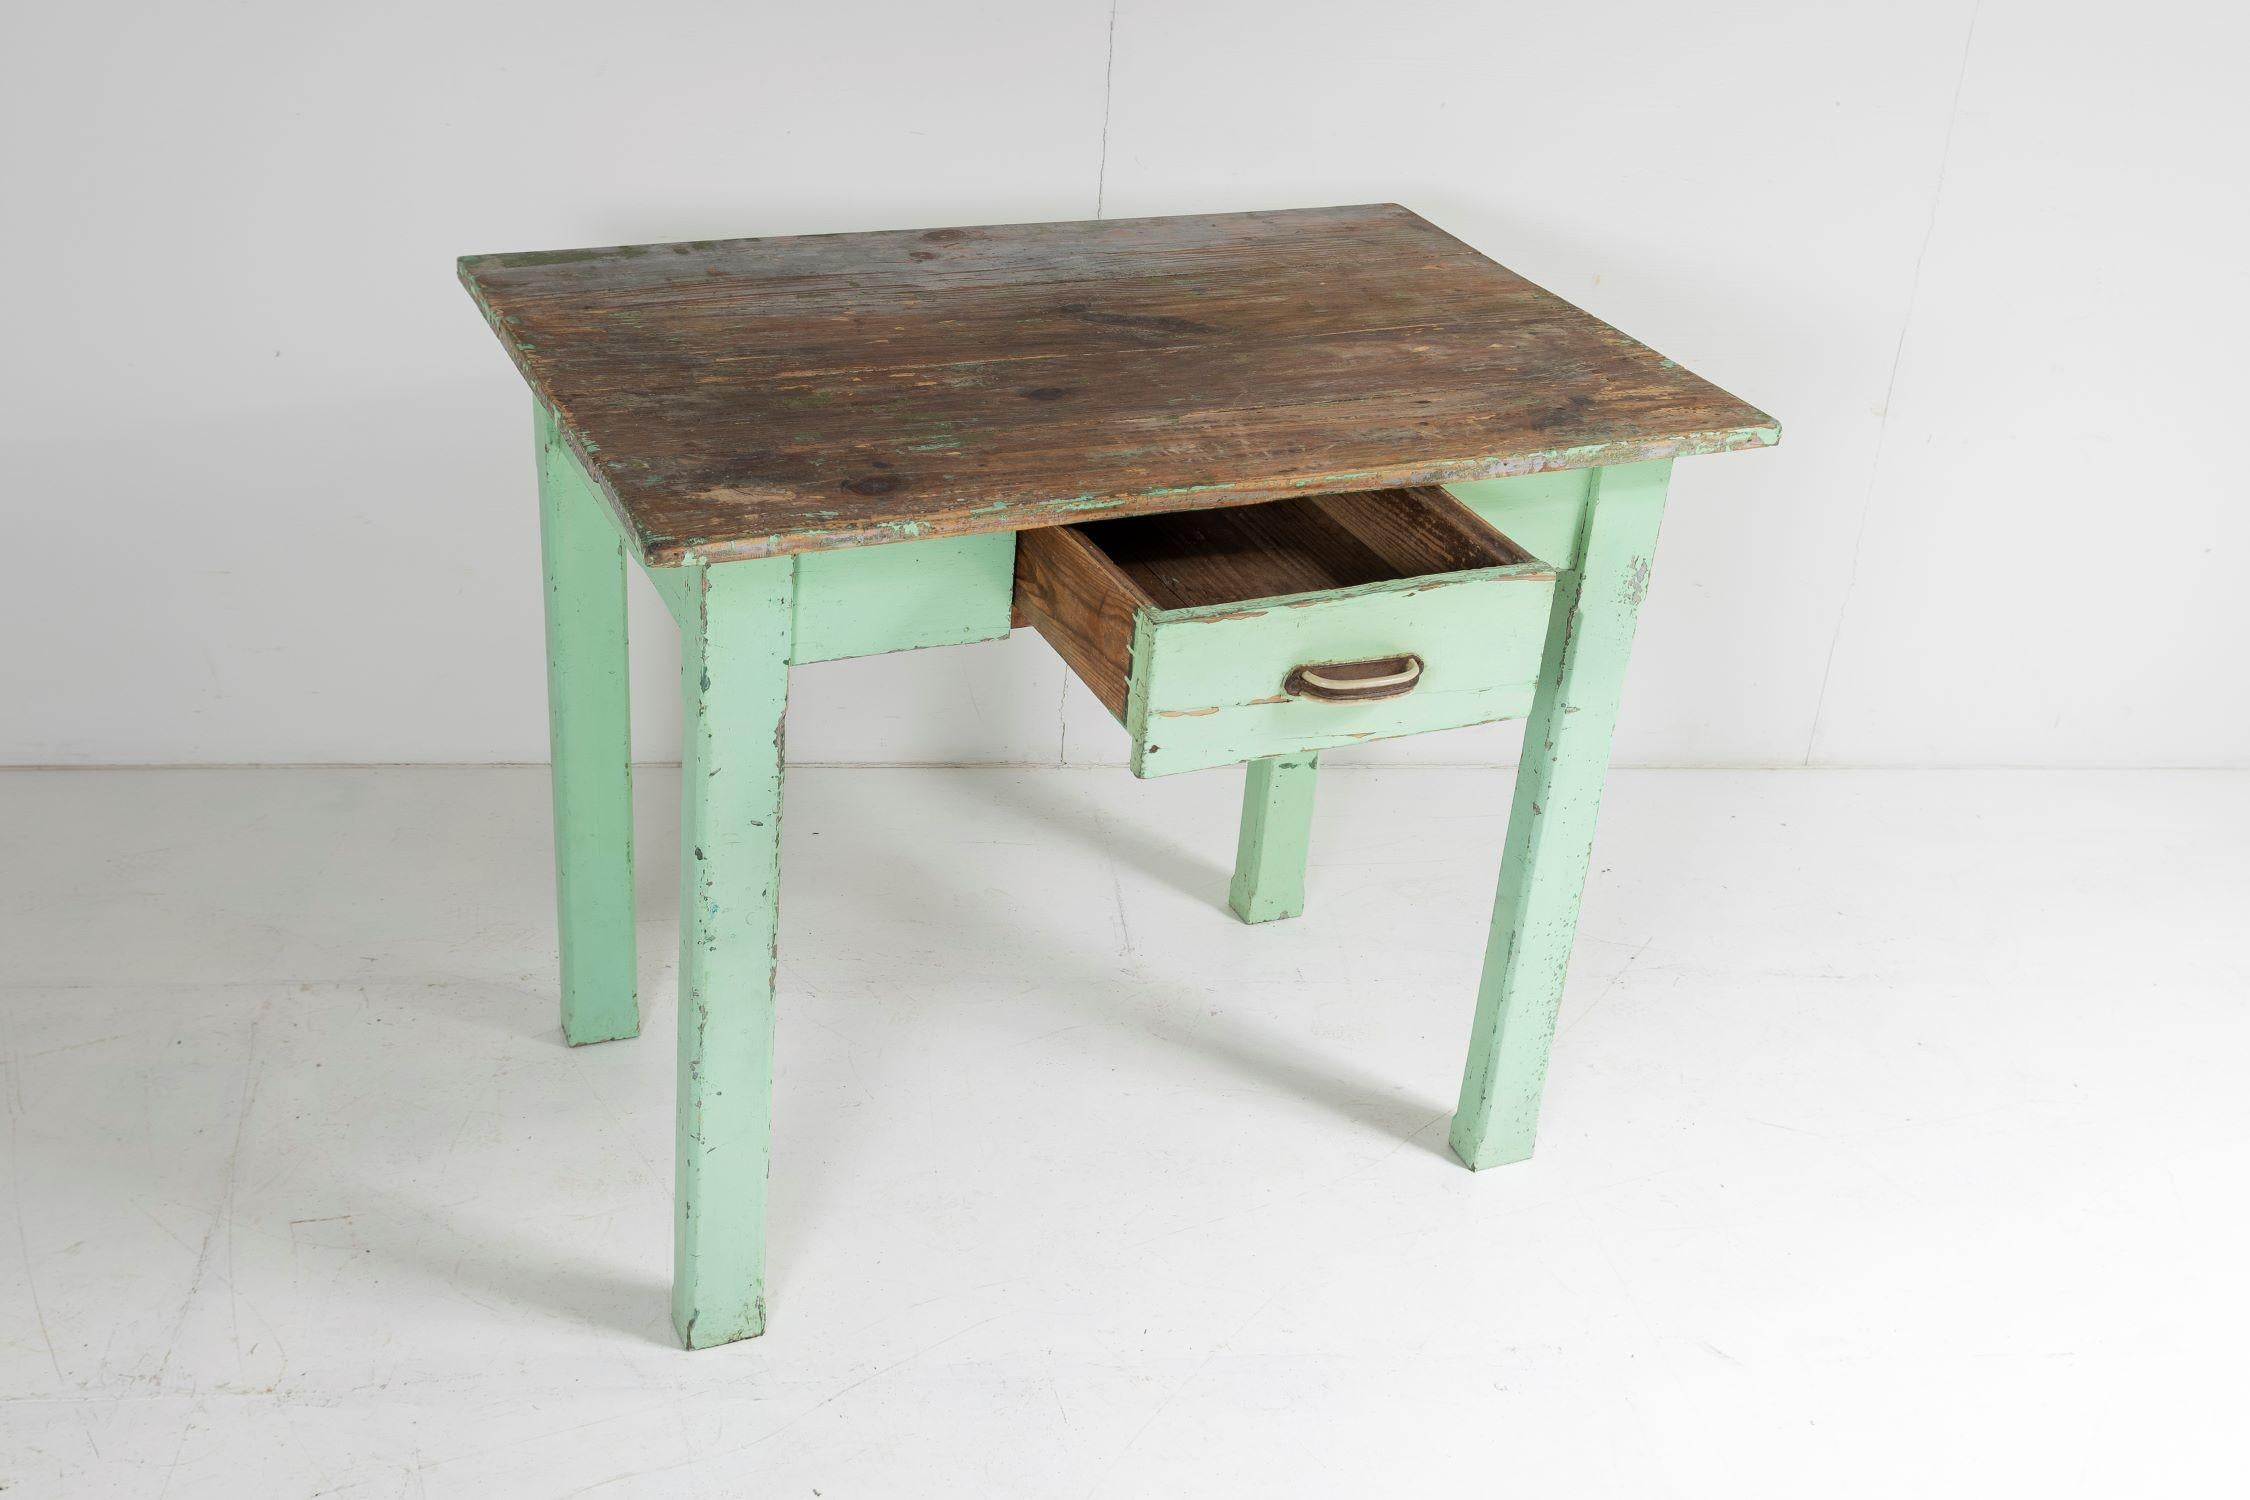 20th Century Small Original Rustic Green Painted Pine Farmhouse Table or Writing Table Desk